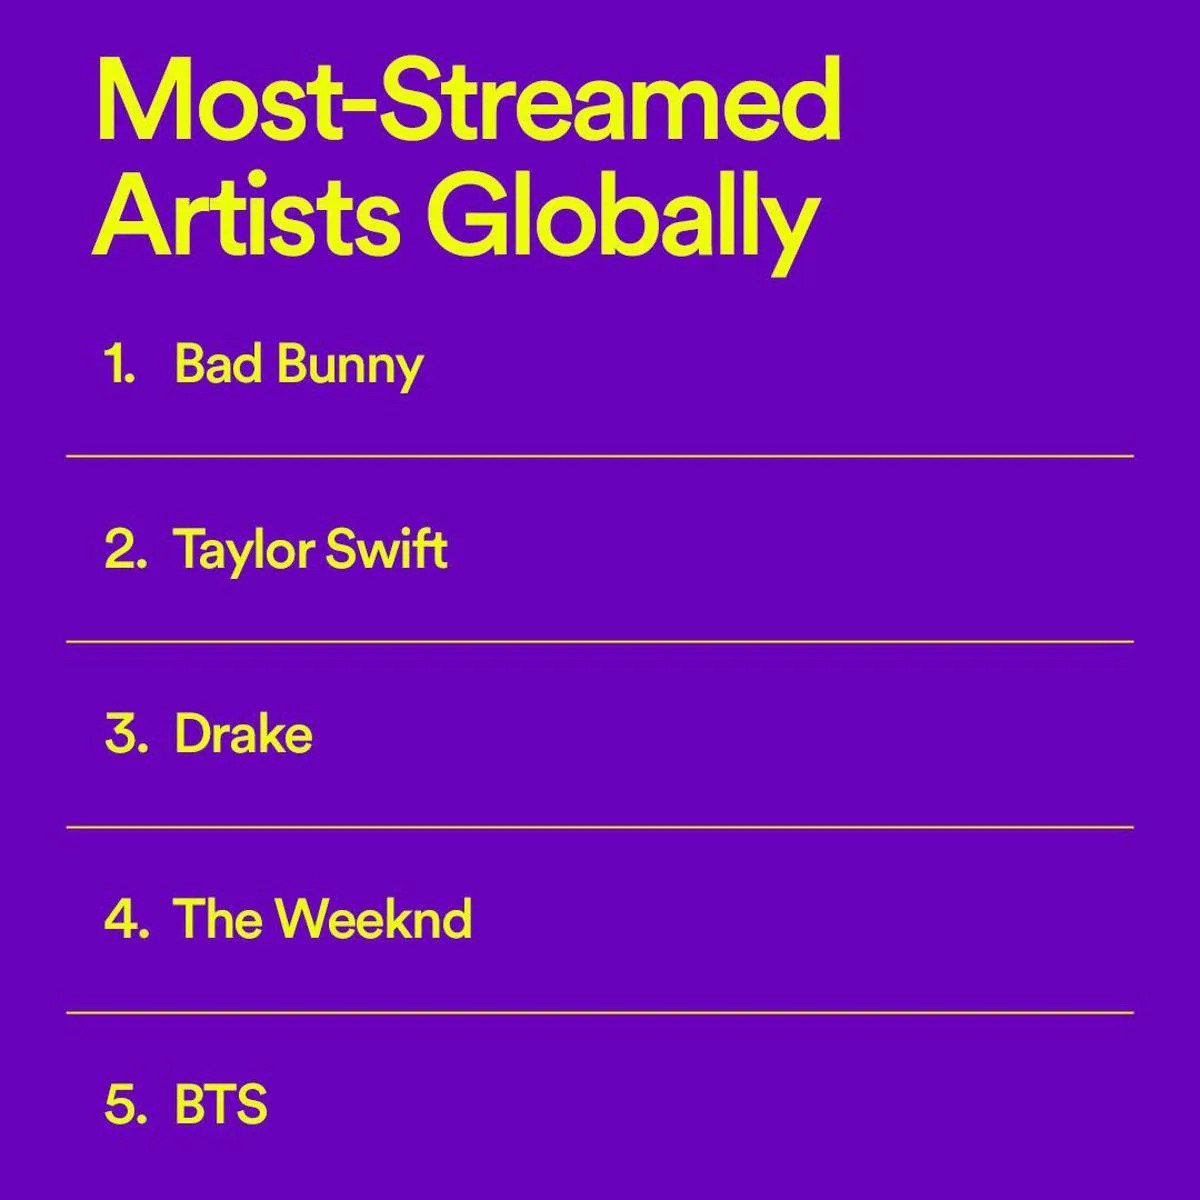 Most streamed artist globally